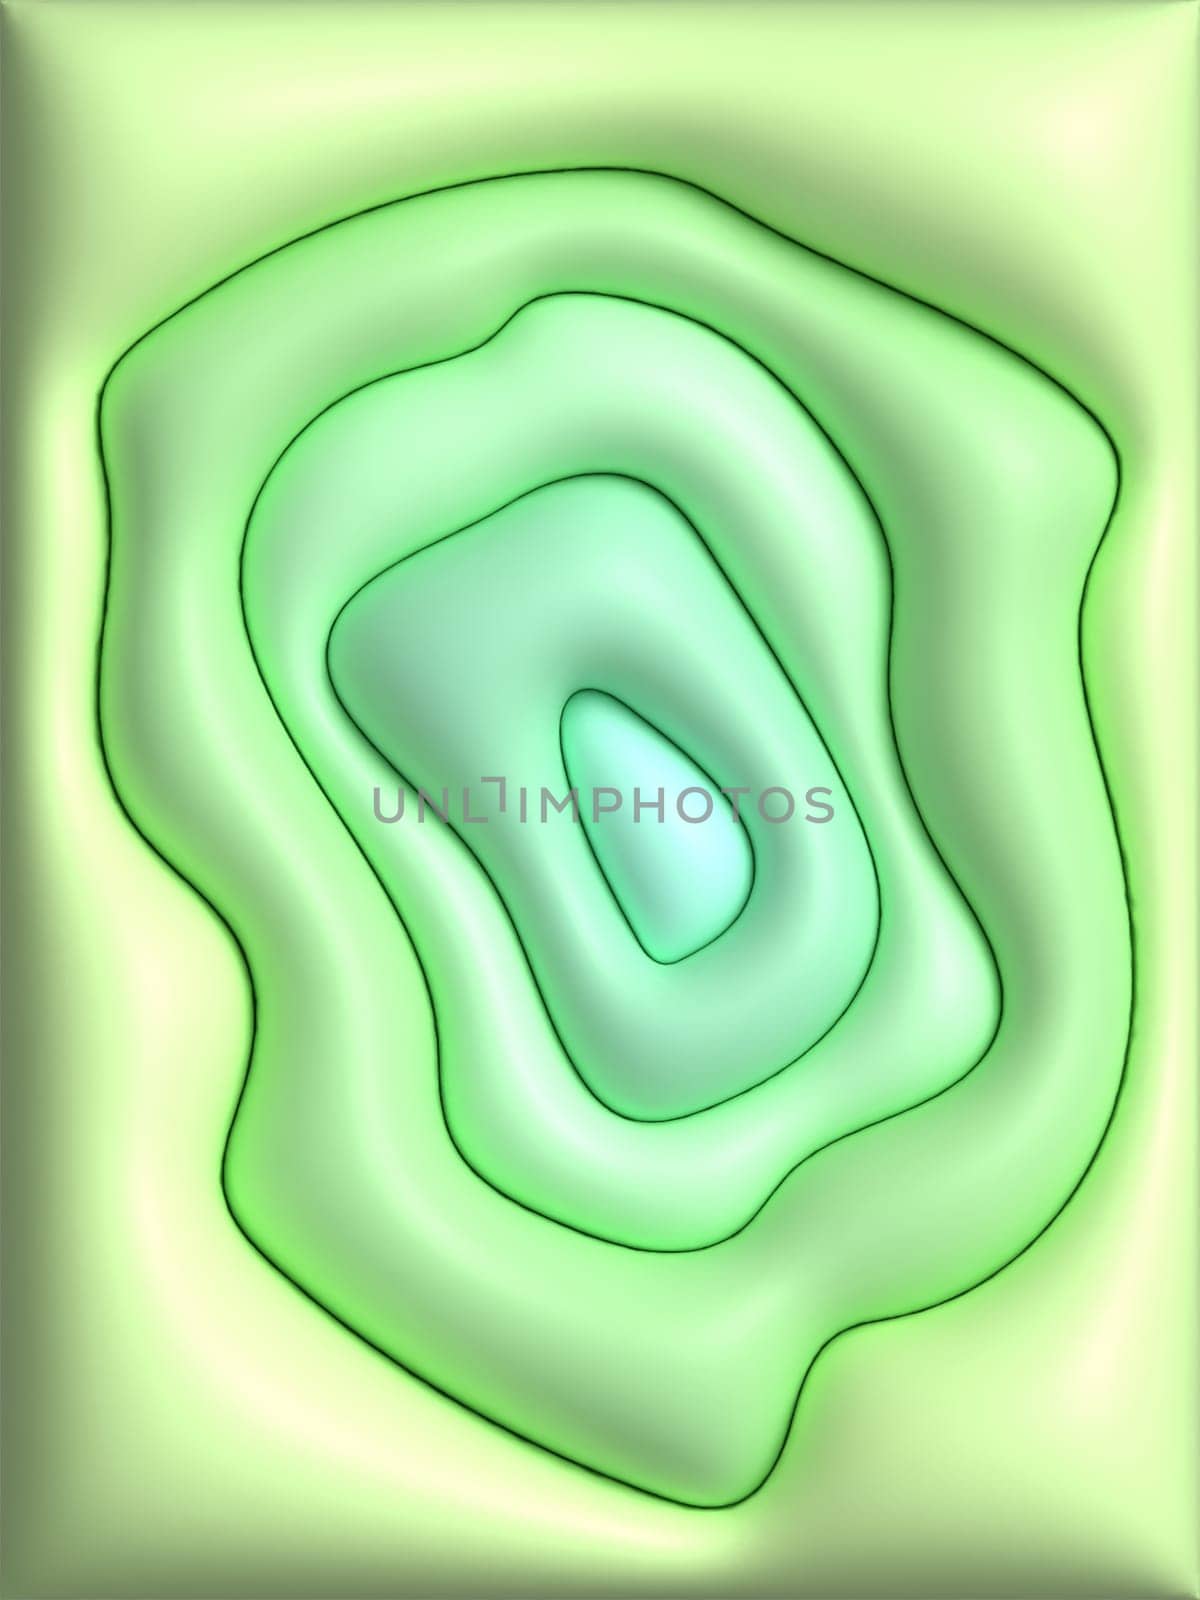 Abstract green background with curved lines, 3D rendered illustration.